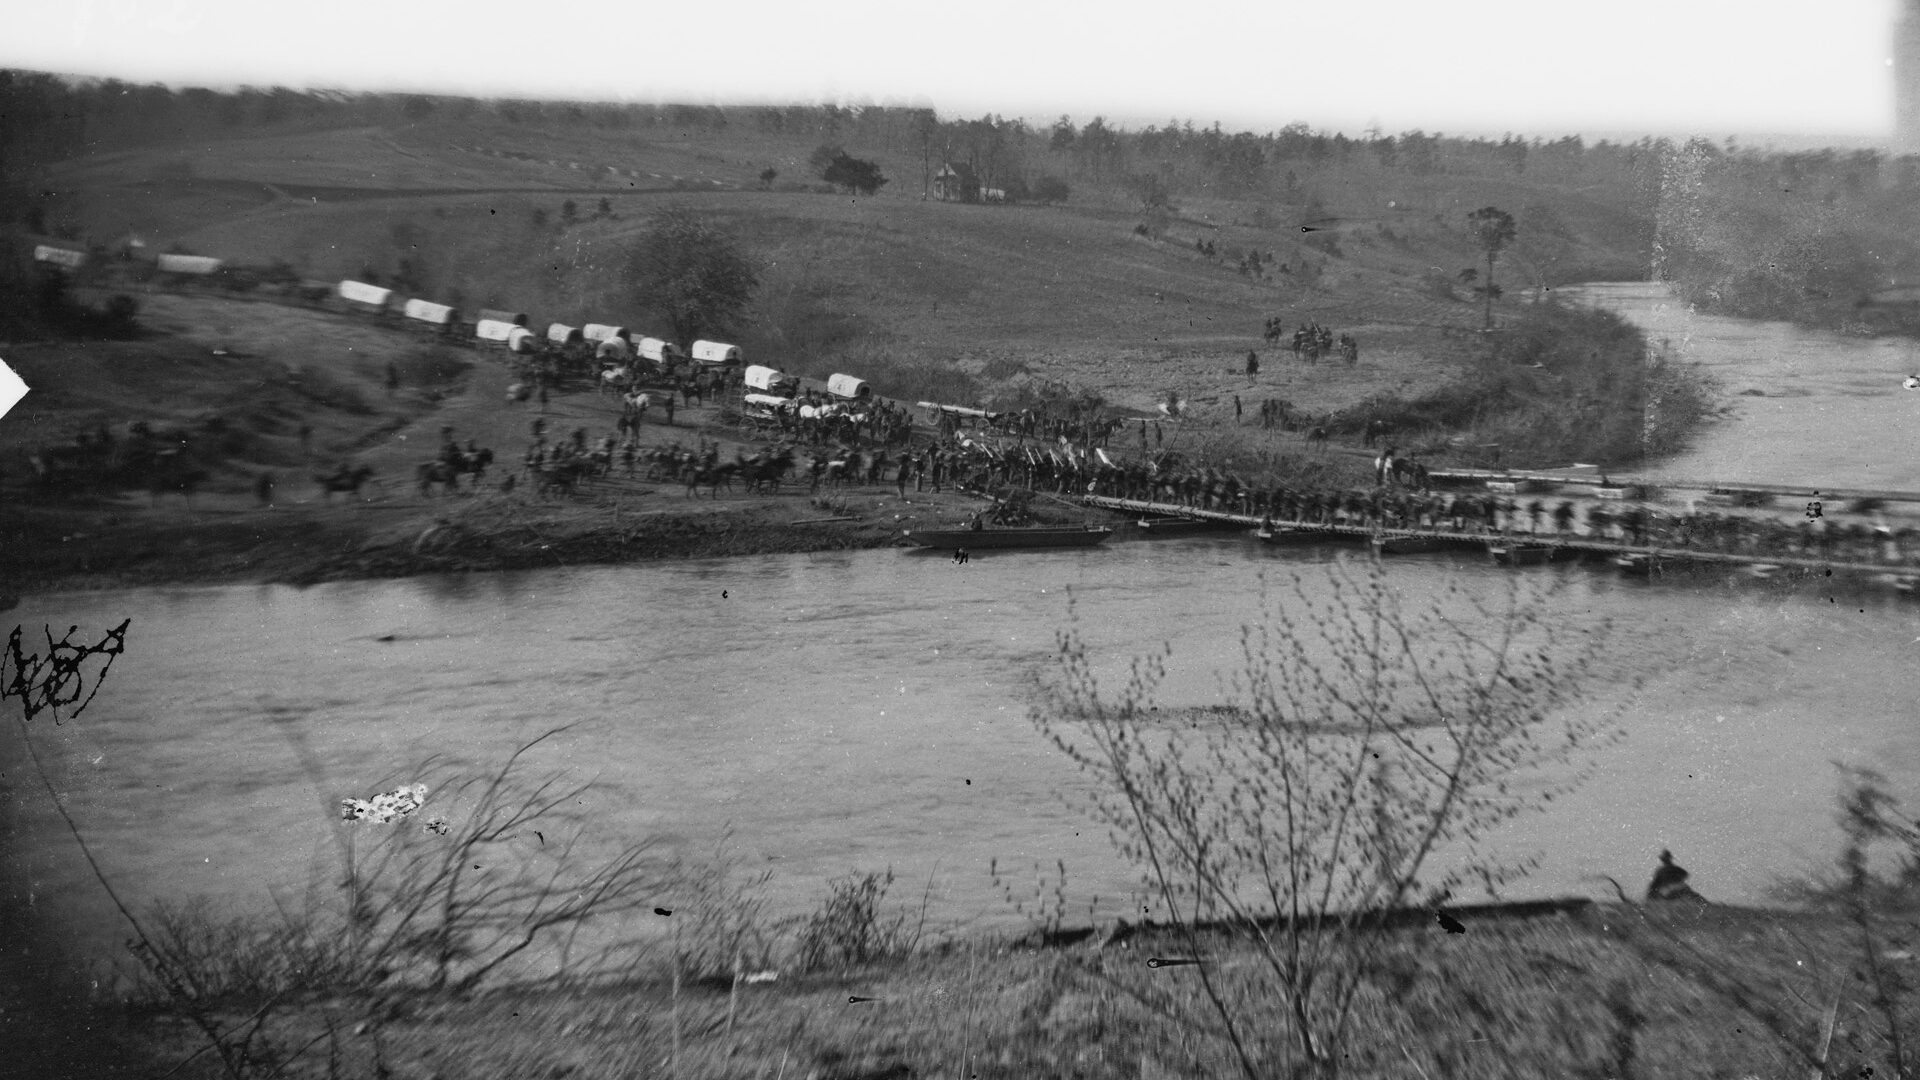 A portion of the Union Army of the Potomac is shown crossing Germanna Ford on the Rapidan River. Confederate General Robert E. Lee’s three corps made forced marches from bivouacs farther west to intercept the Federals.